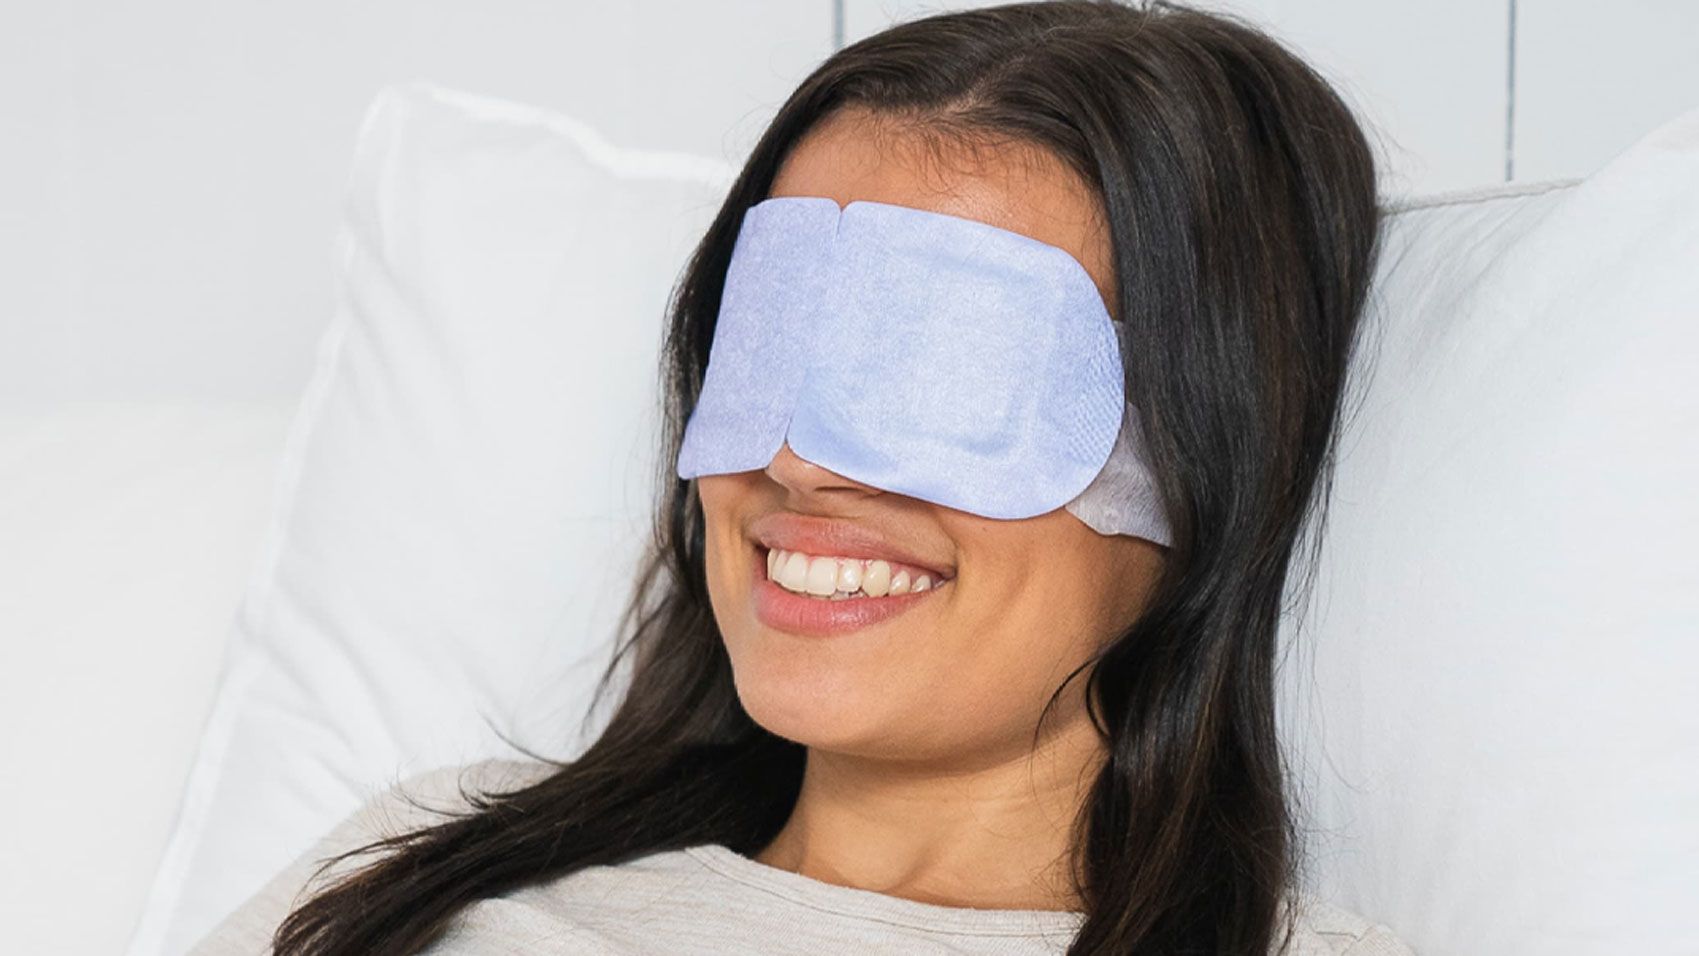 best eye mask: 5 Best Eye Masks in India for Sleeping - The Economic Times